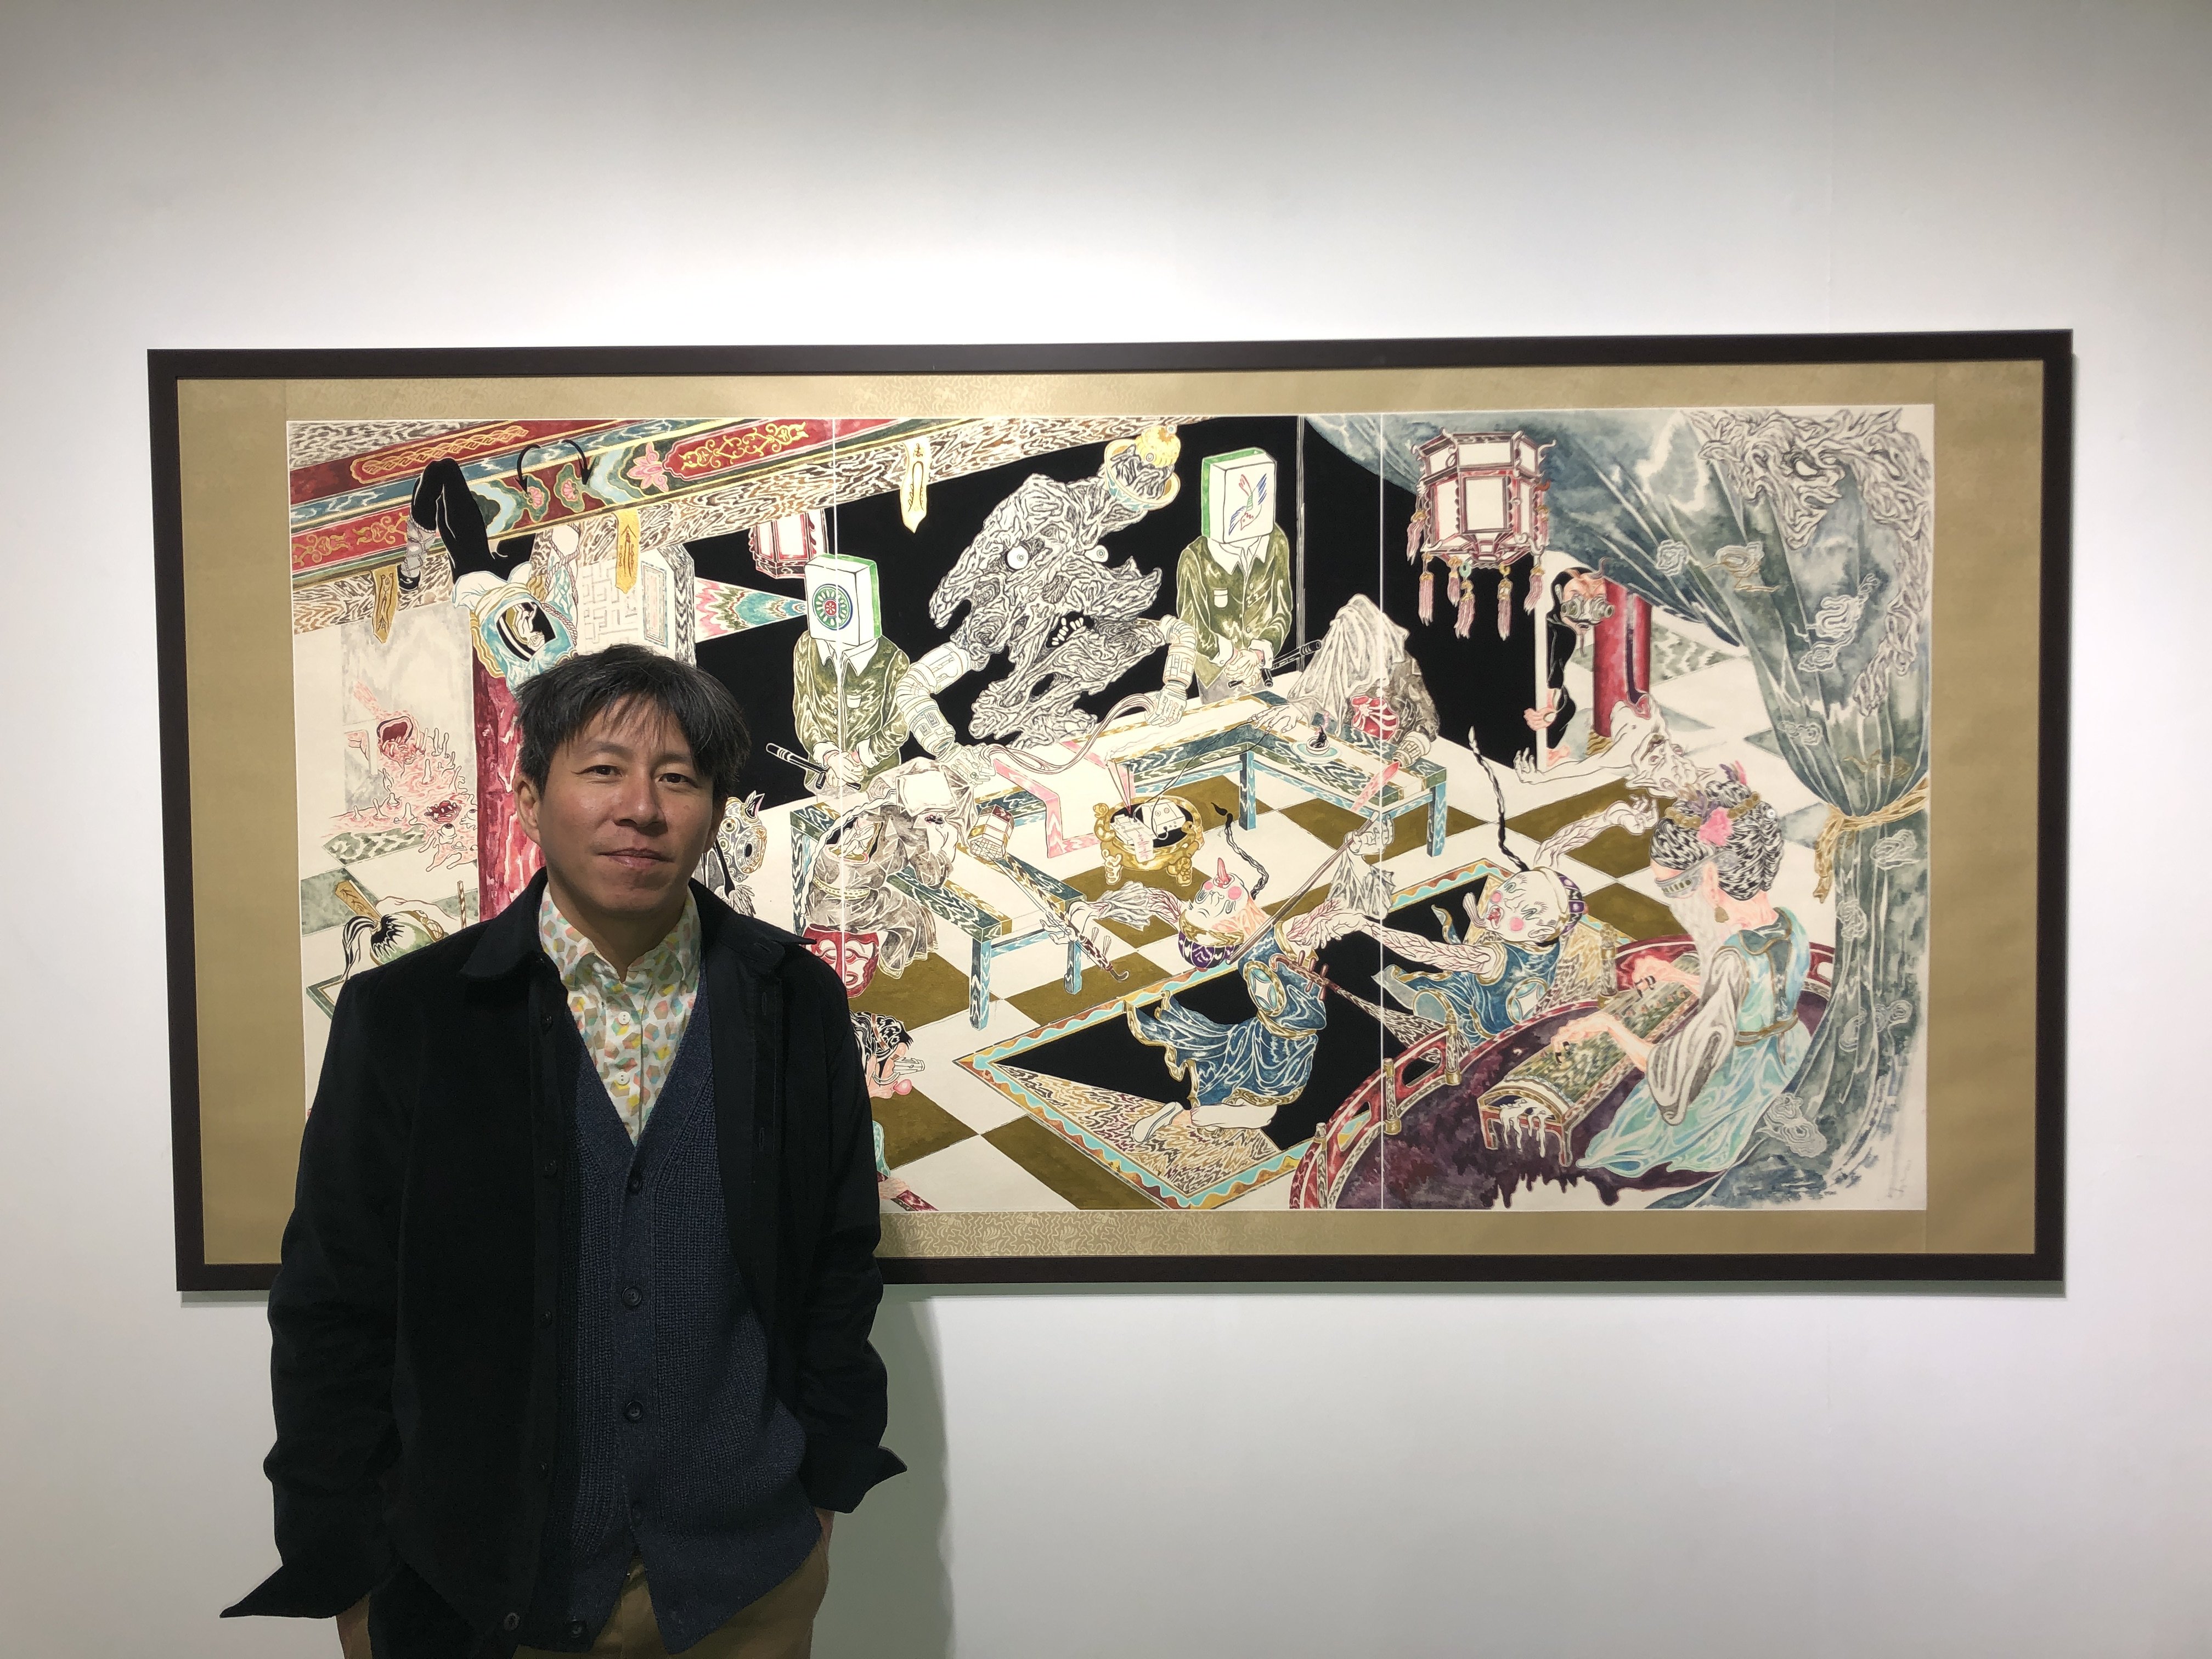 Hong Kong-born, Canada-based artist Howie Tsui stands in front of “The Banquet” (2023), part of his solo exhibition at Hanart TZ Gallery in Kwai Chung, Hong Kong. Tsui says his practice is inspired by the likes of Jin Yong’s wuxia martial arts novels. Photo: Enid Tsui